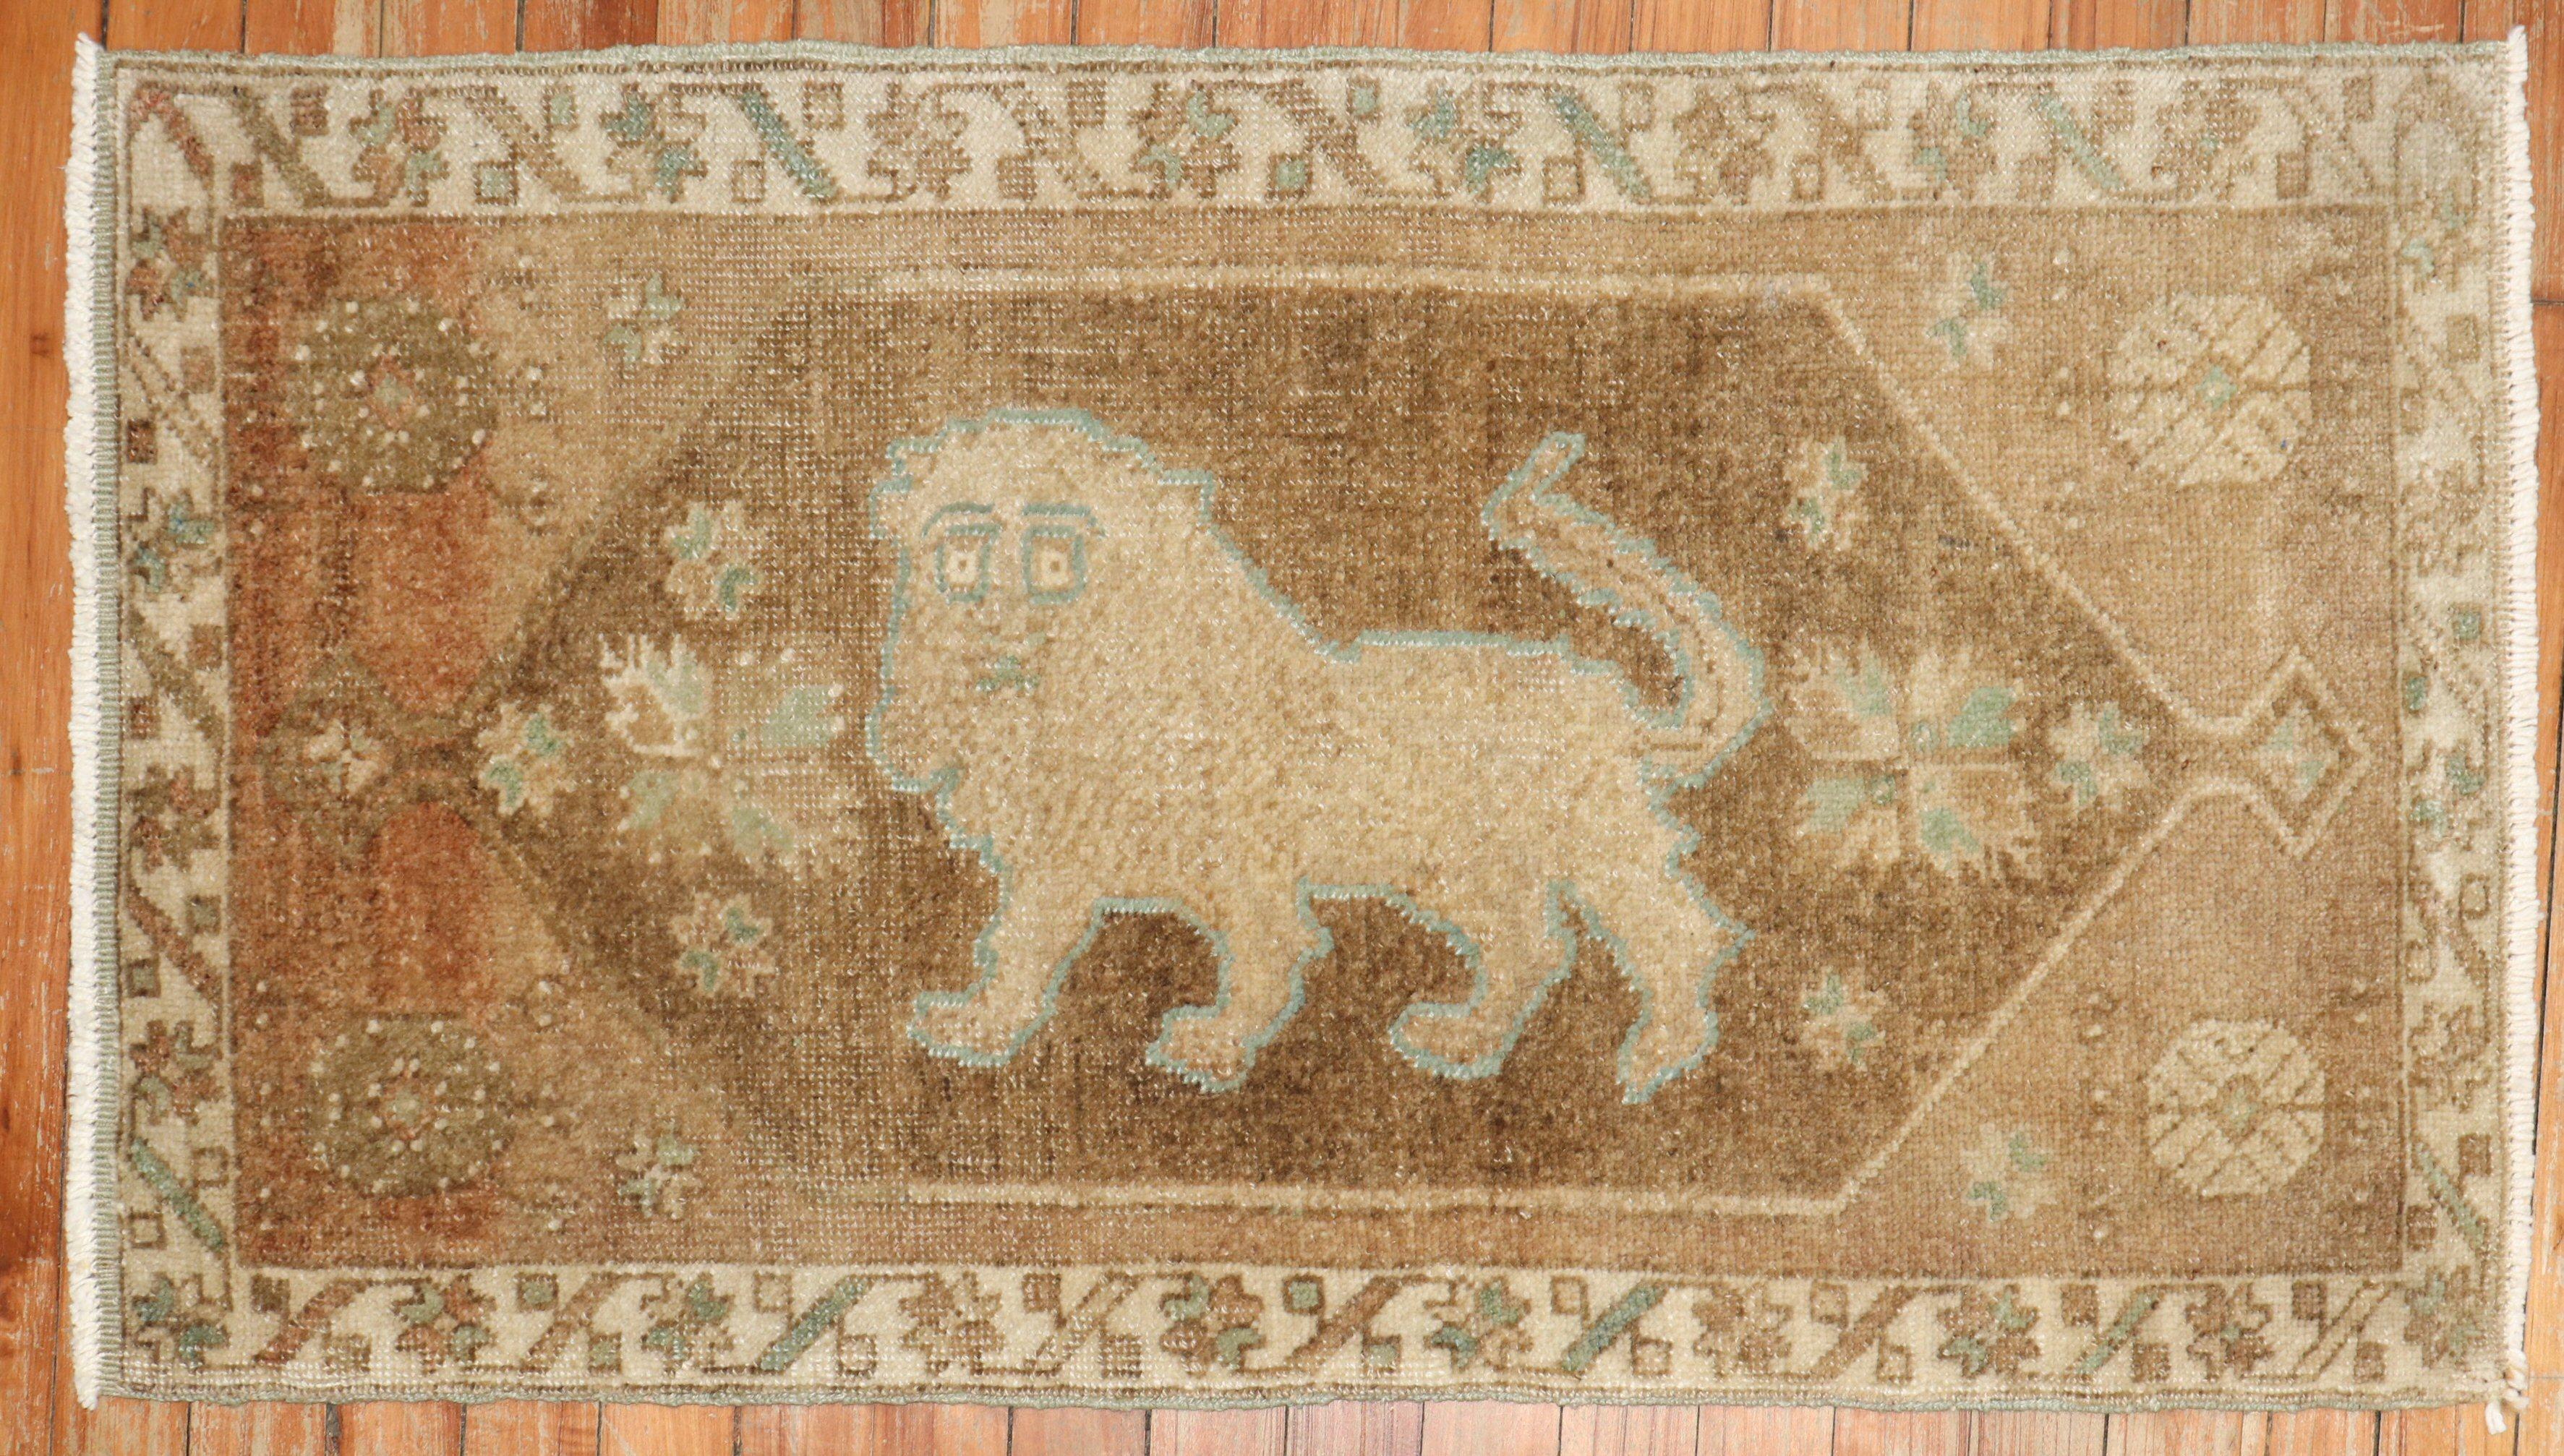 MId 20th Century Turkish Rug with a lion motif

Details
rug no.	31818
size	1' 10